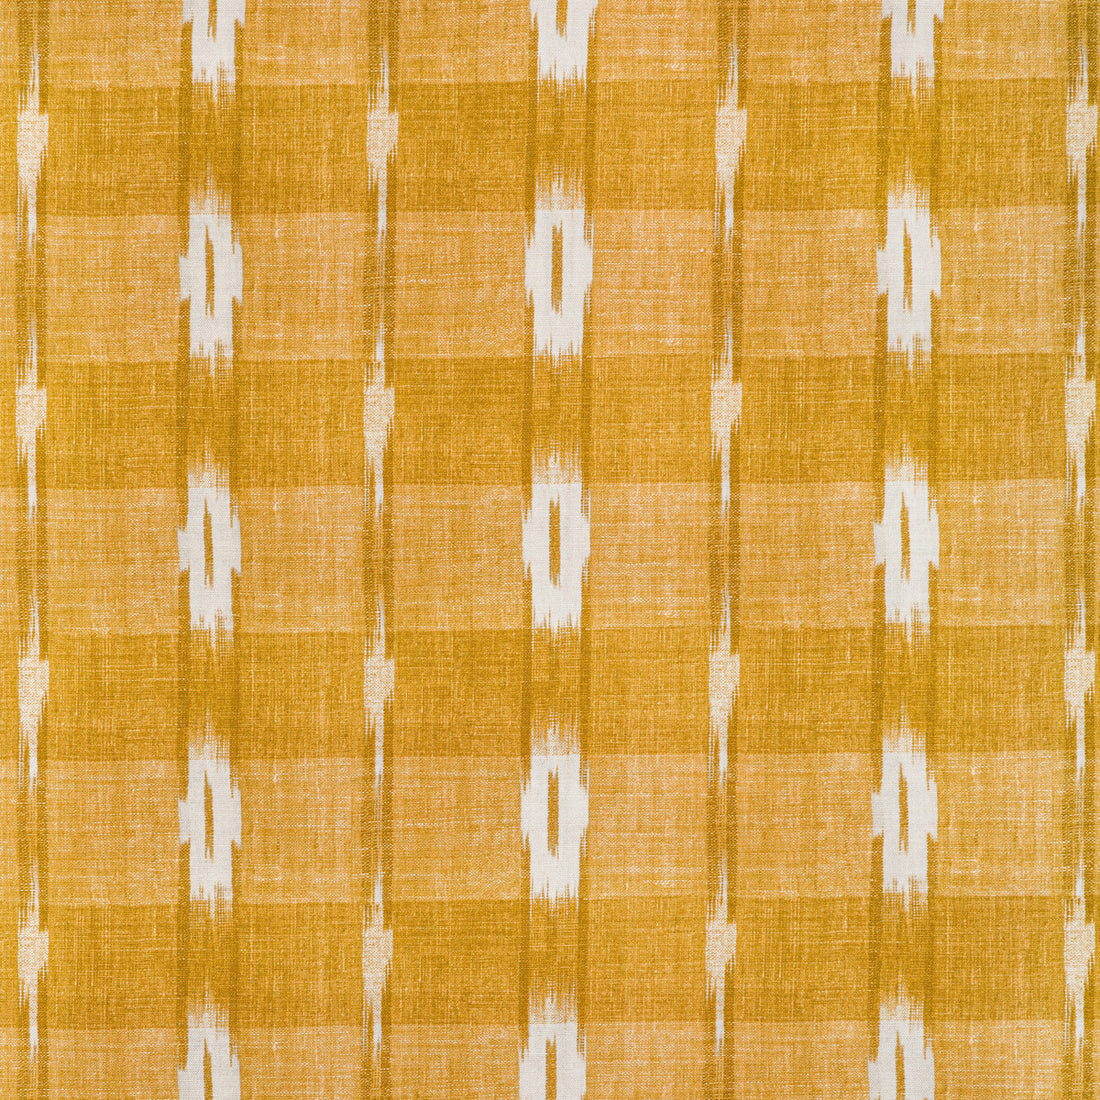 Girard Print fabric in gold color - pattern 8022106.4.0 - by Brunschwig &amp; Fils in the Manoir collection